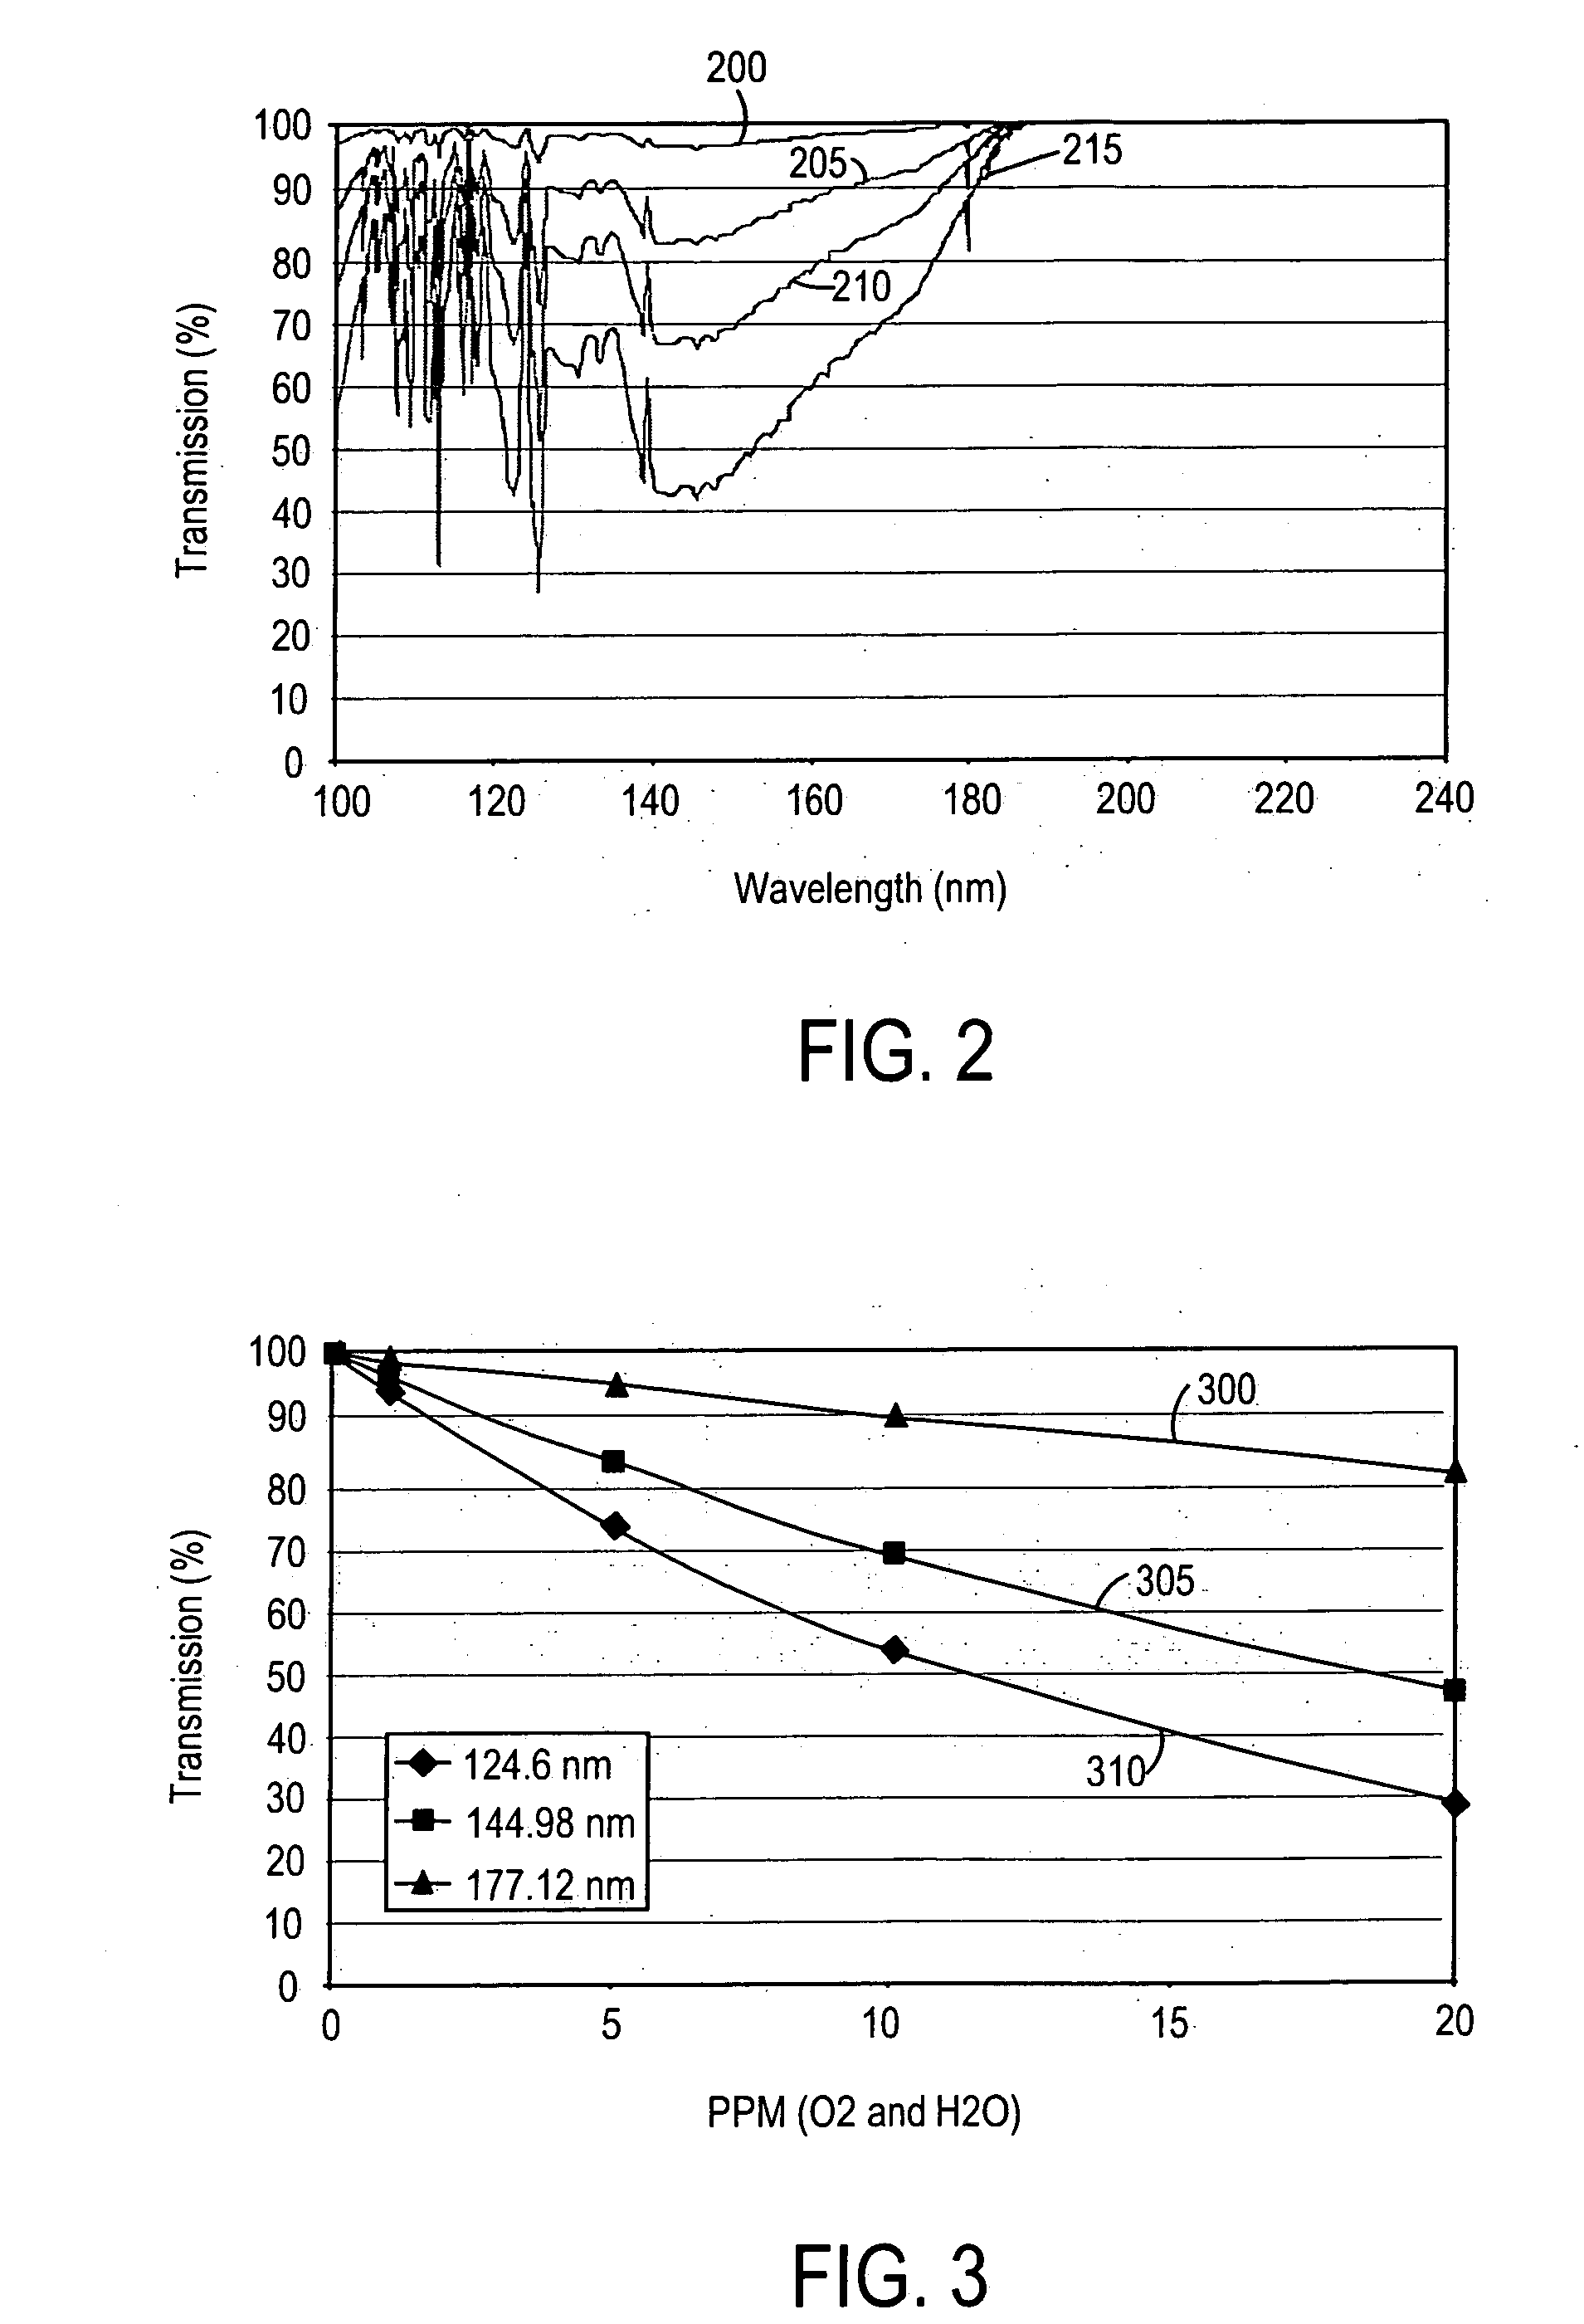 Contamination monitoring and control techniques for use with an optical metrology instrument